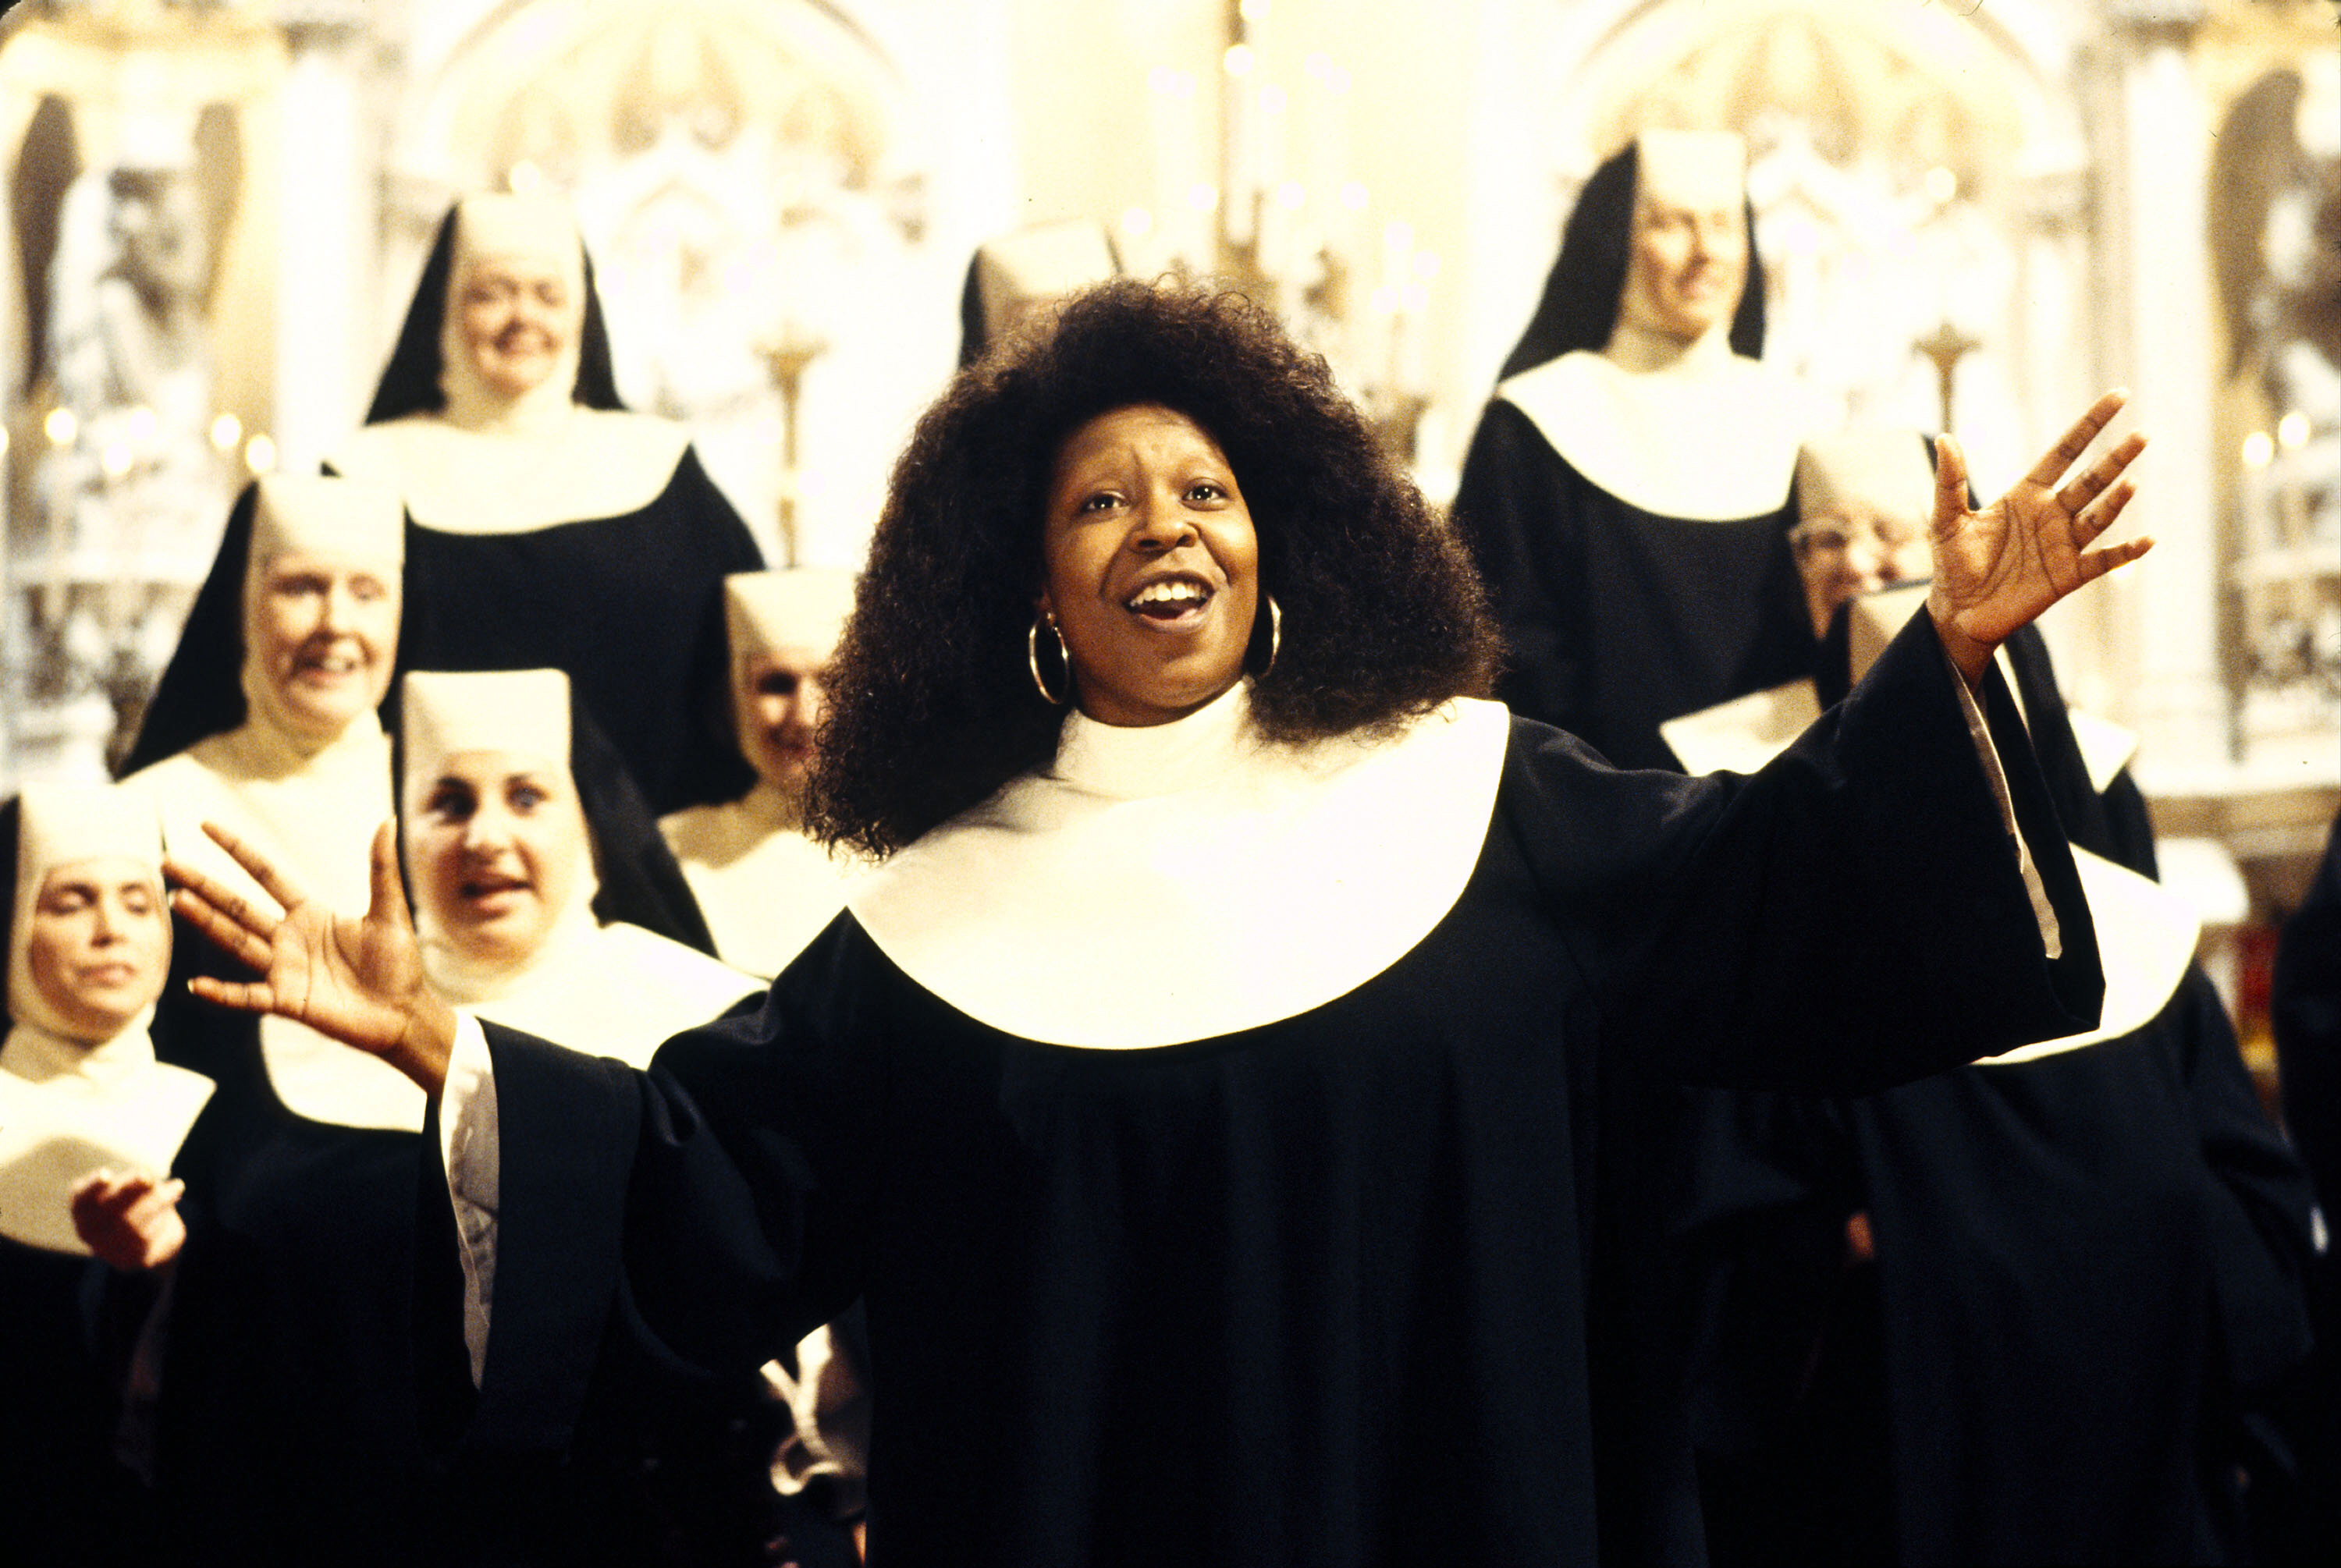 Sister Act (1992) Directed by Emile Ardolino
                      Shown: Whoopie Goldberg (Buena Vista Pictures/Photofest)